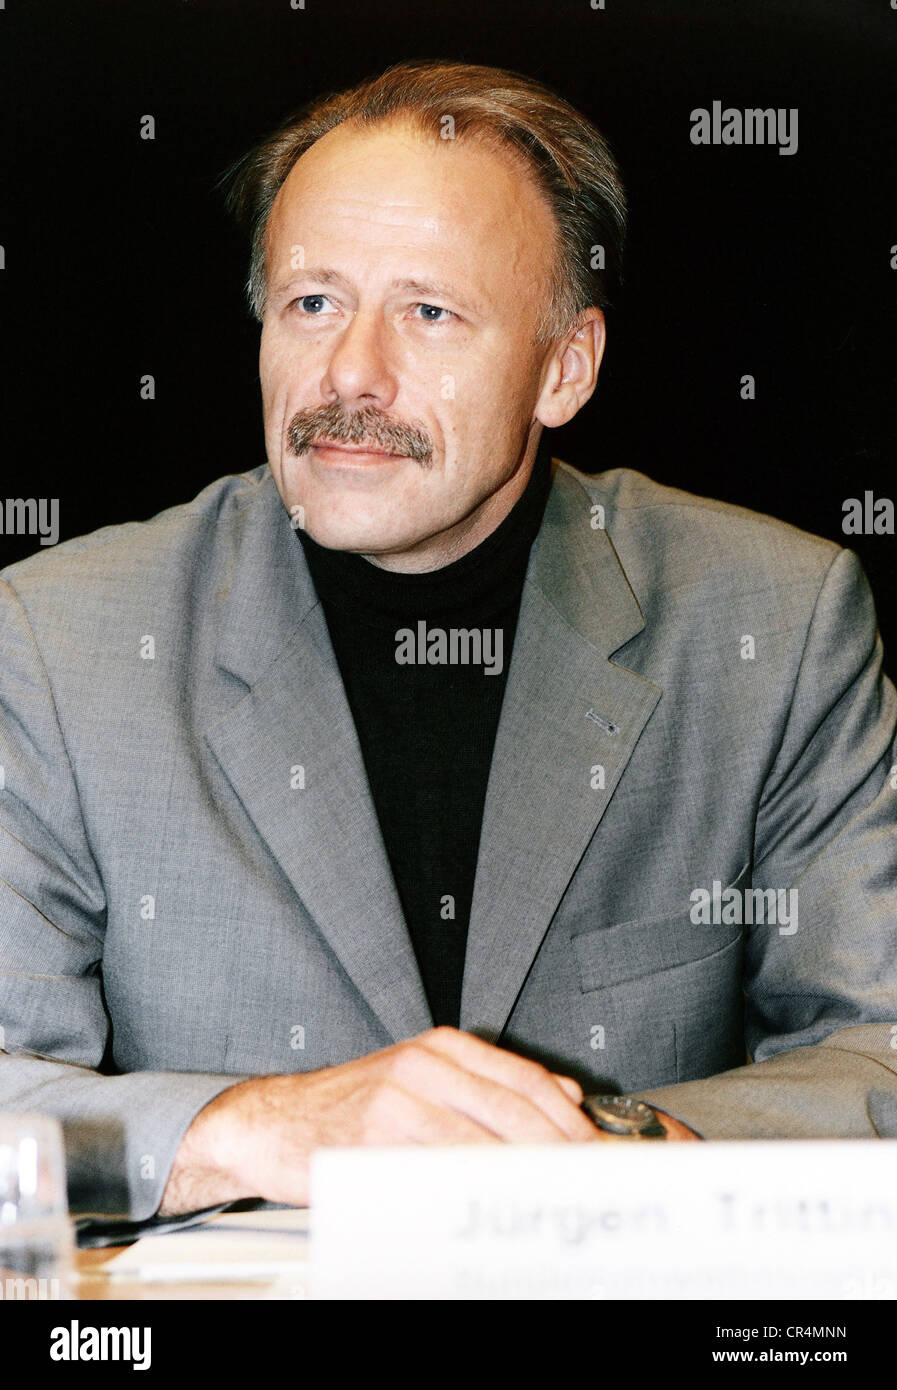 Trittin, Juergen, * 25.7.1954, German poltician (Alliance 90/The Greens), Federal Minister for the Environment, Nature Conservation and Nuclear Safety 1998 - 2005, portrait, 2001, Stock Photo